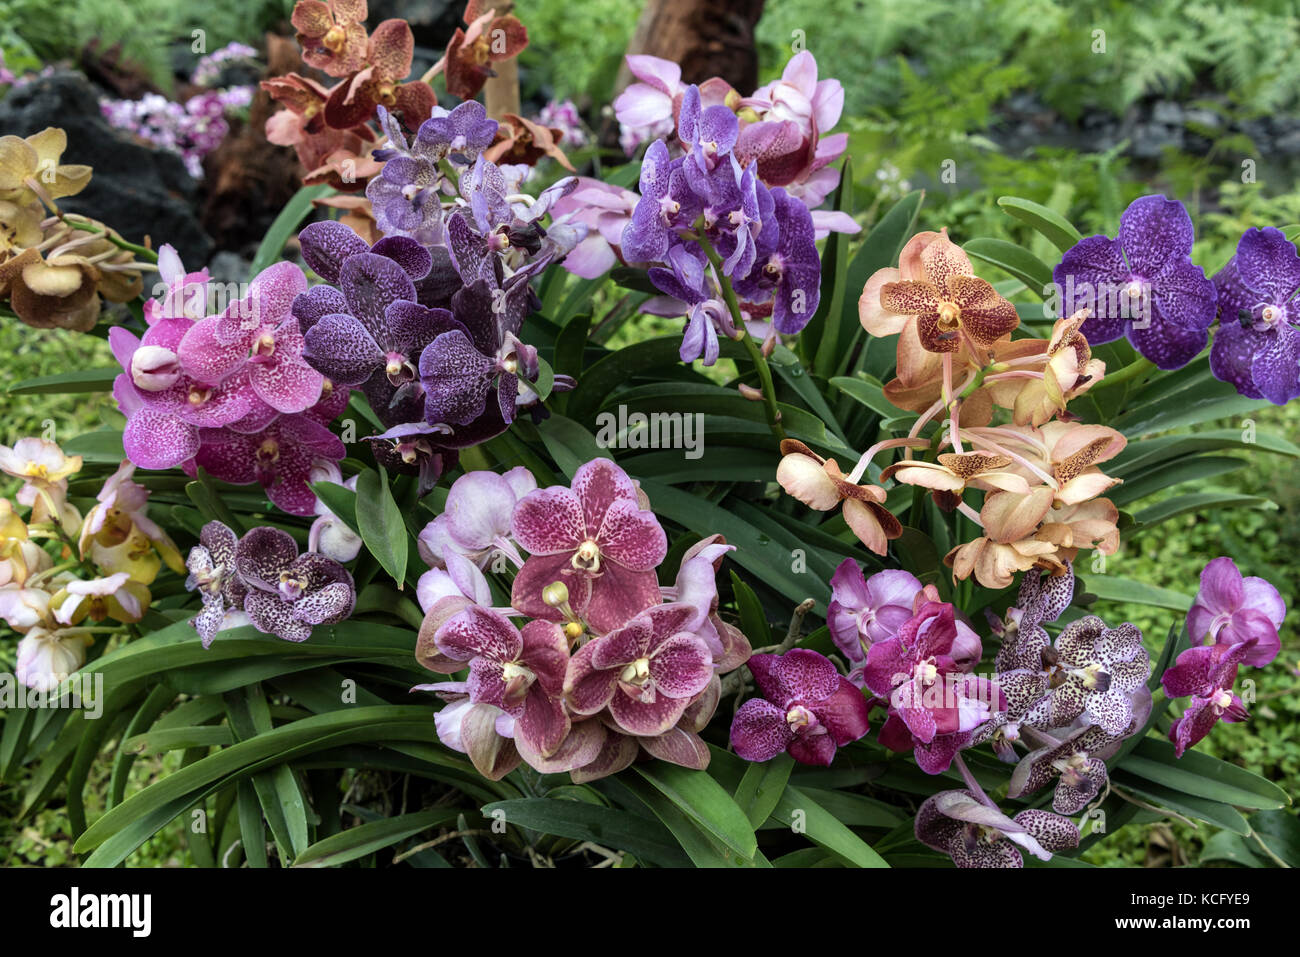 On display are three genera of orchids - Ascocentrum, Arachnis and Vanda Mokaras. The orchids are on display inside the roof-covered Flower Dome at Stock Photo